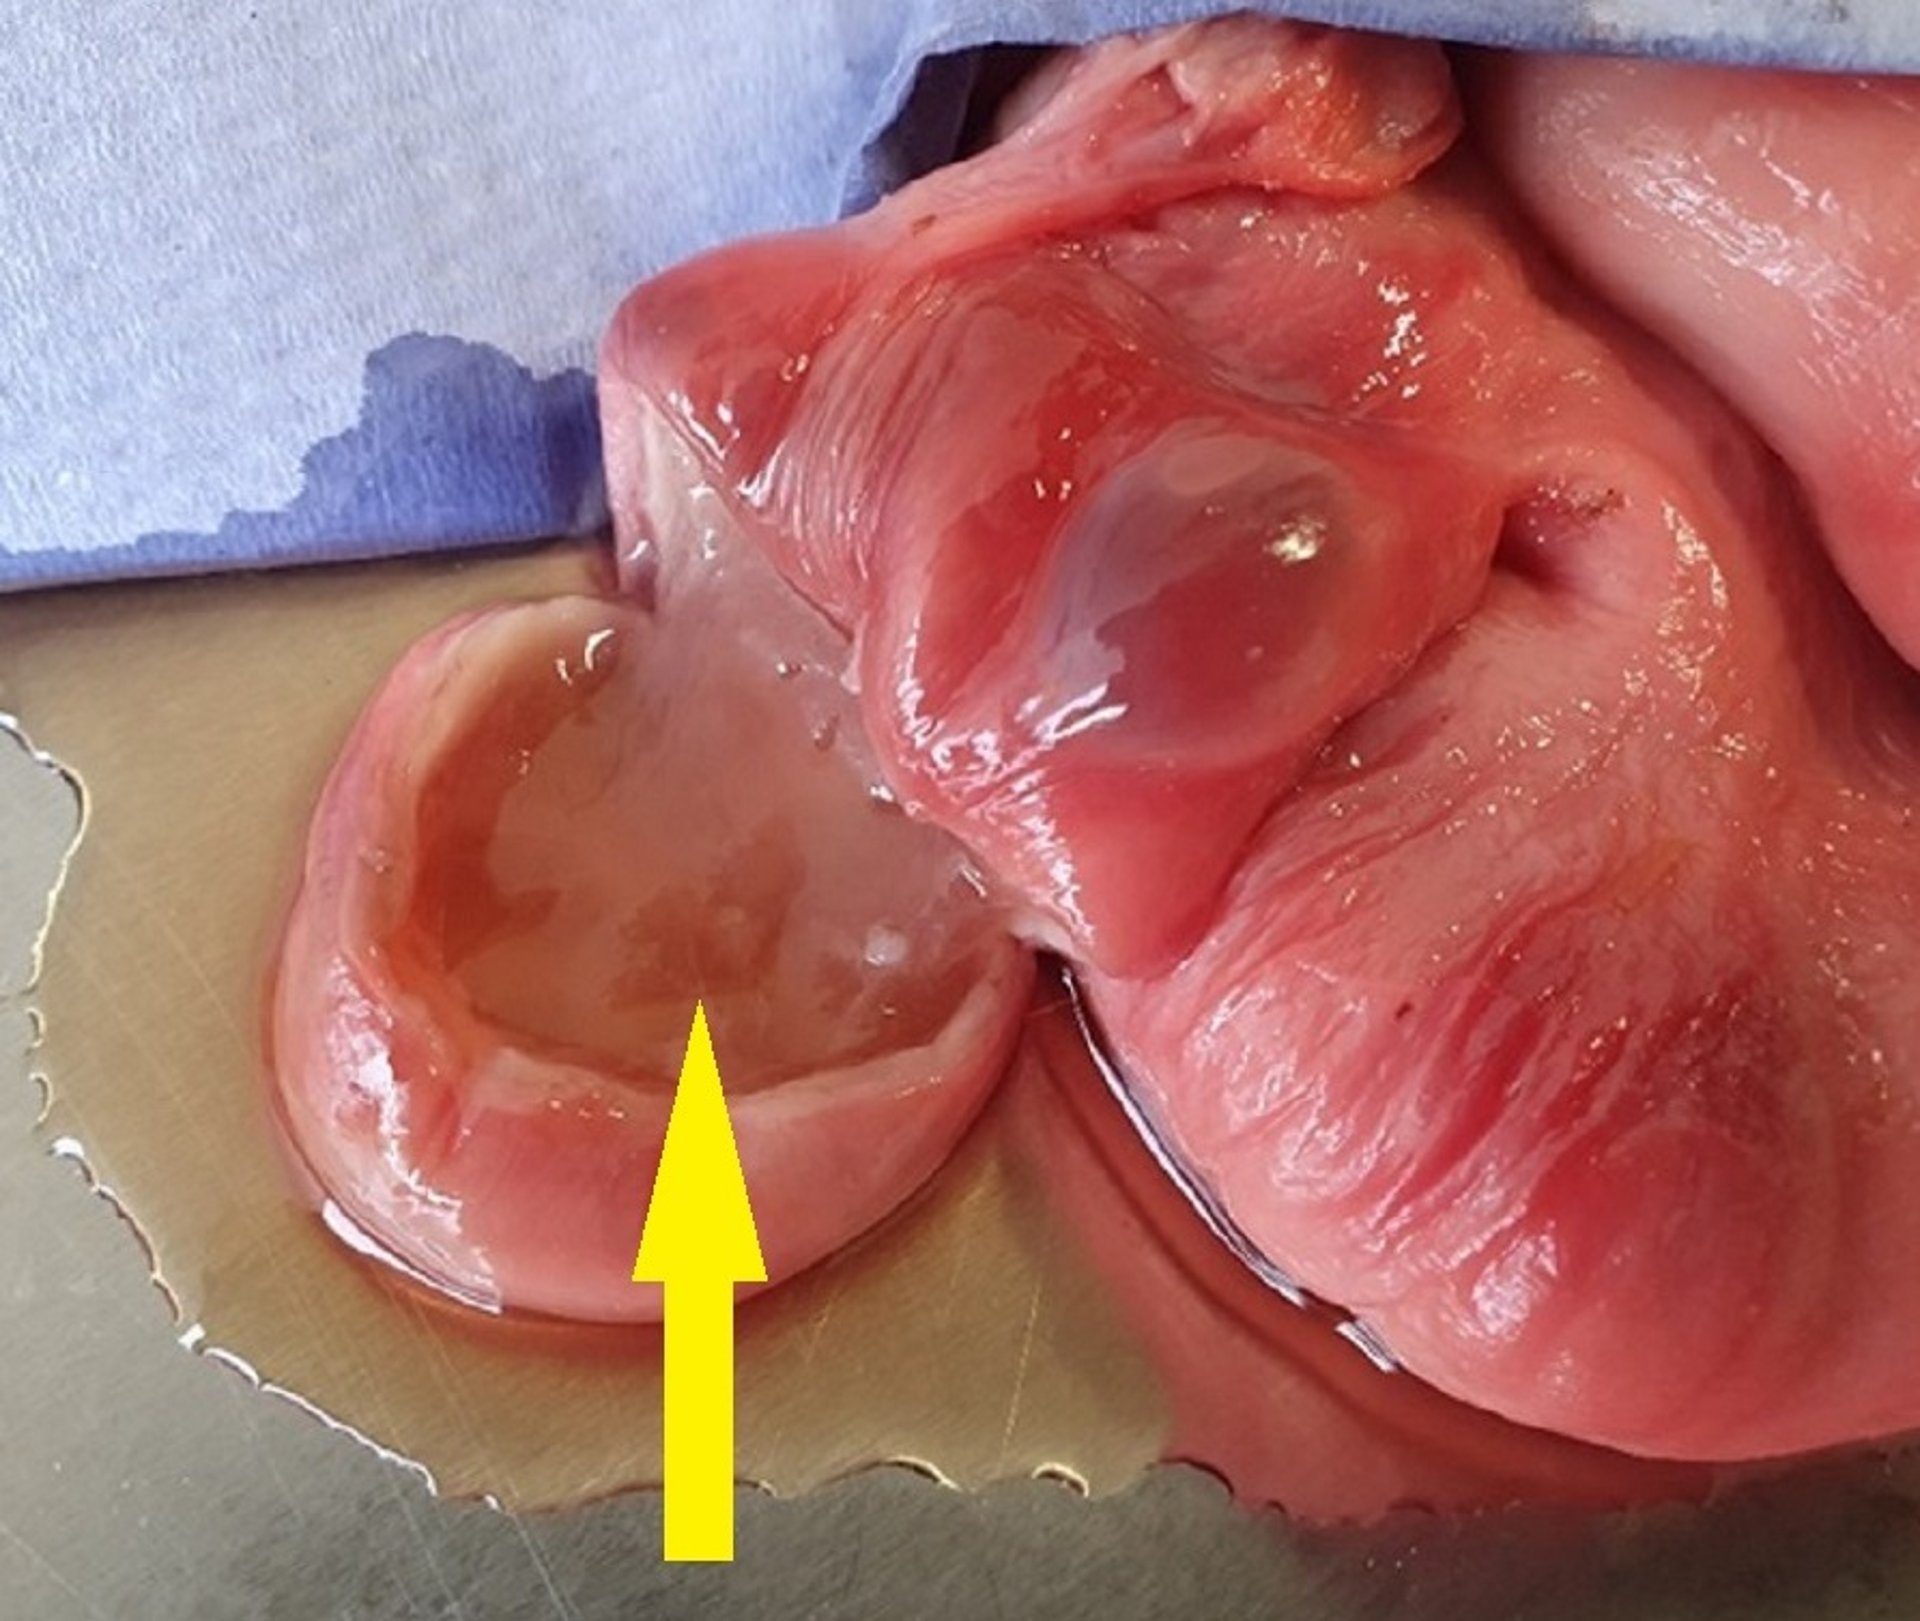 Transected follicular cyst, ovary, cow